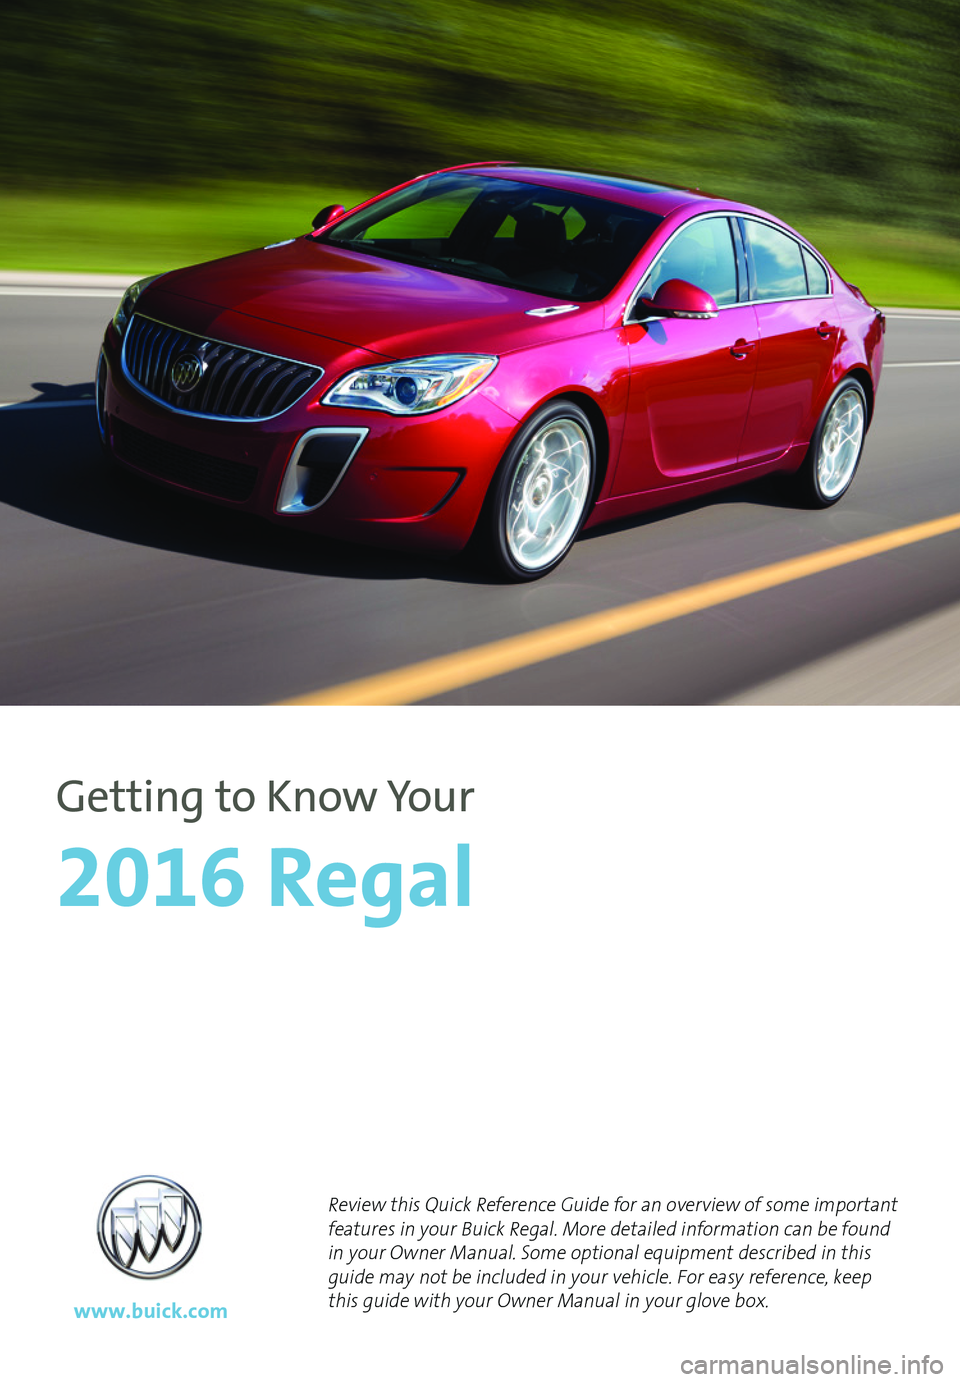 BUICK REGAL 2016  Get To Know Guide 1
Review this Quick Reference Guide for an overview of some important features in your Buick Regal. More detailed information can be found in your Owner Manual. Some optional equipment described in th